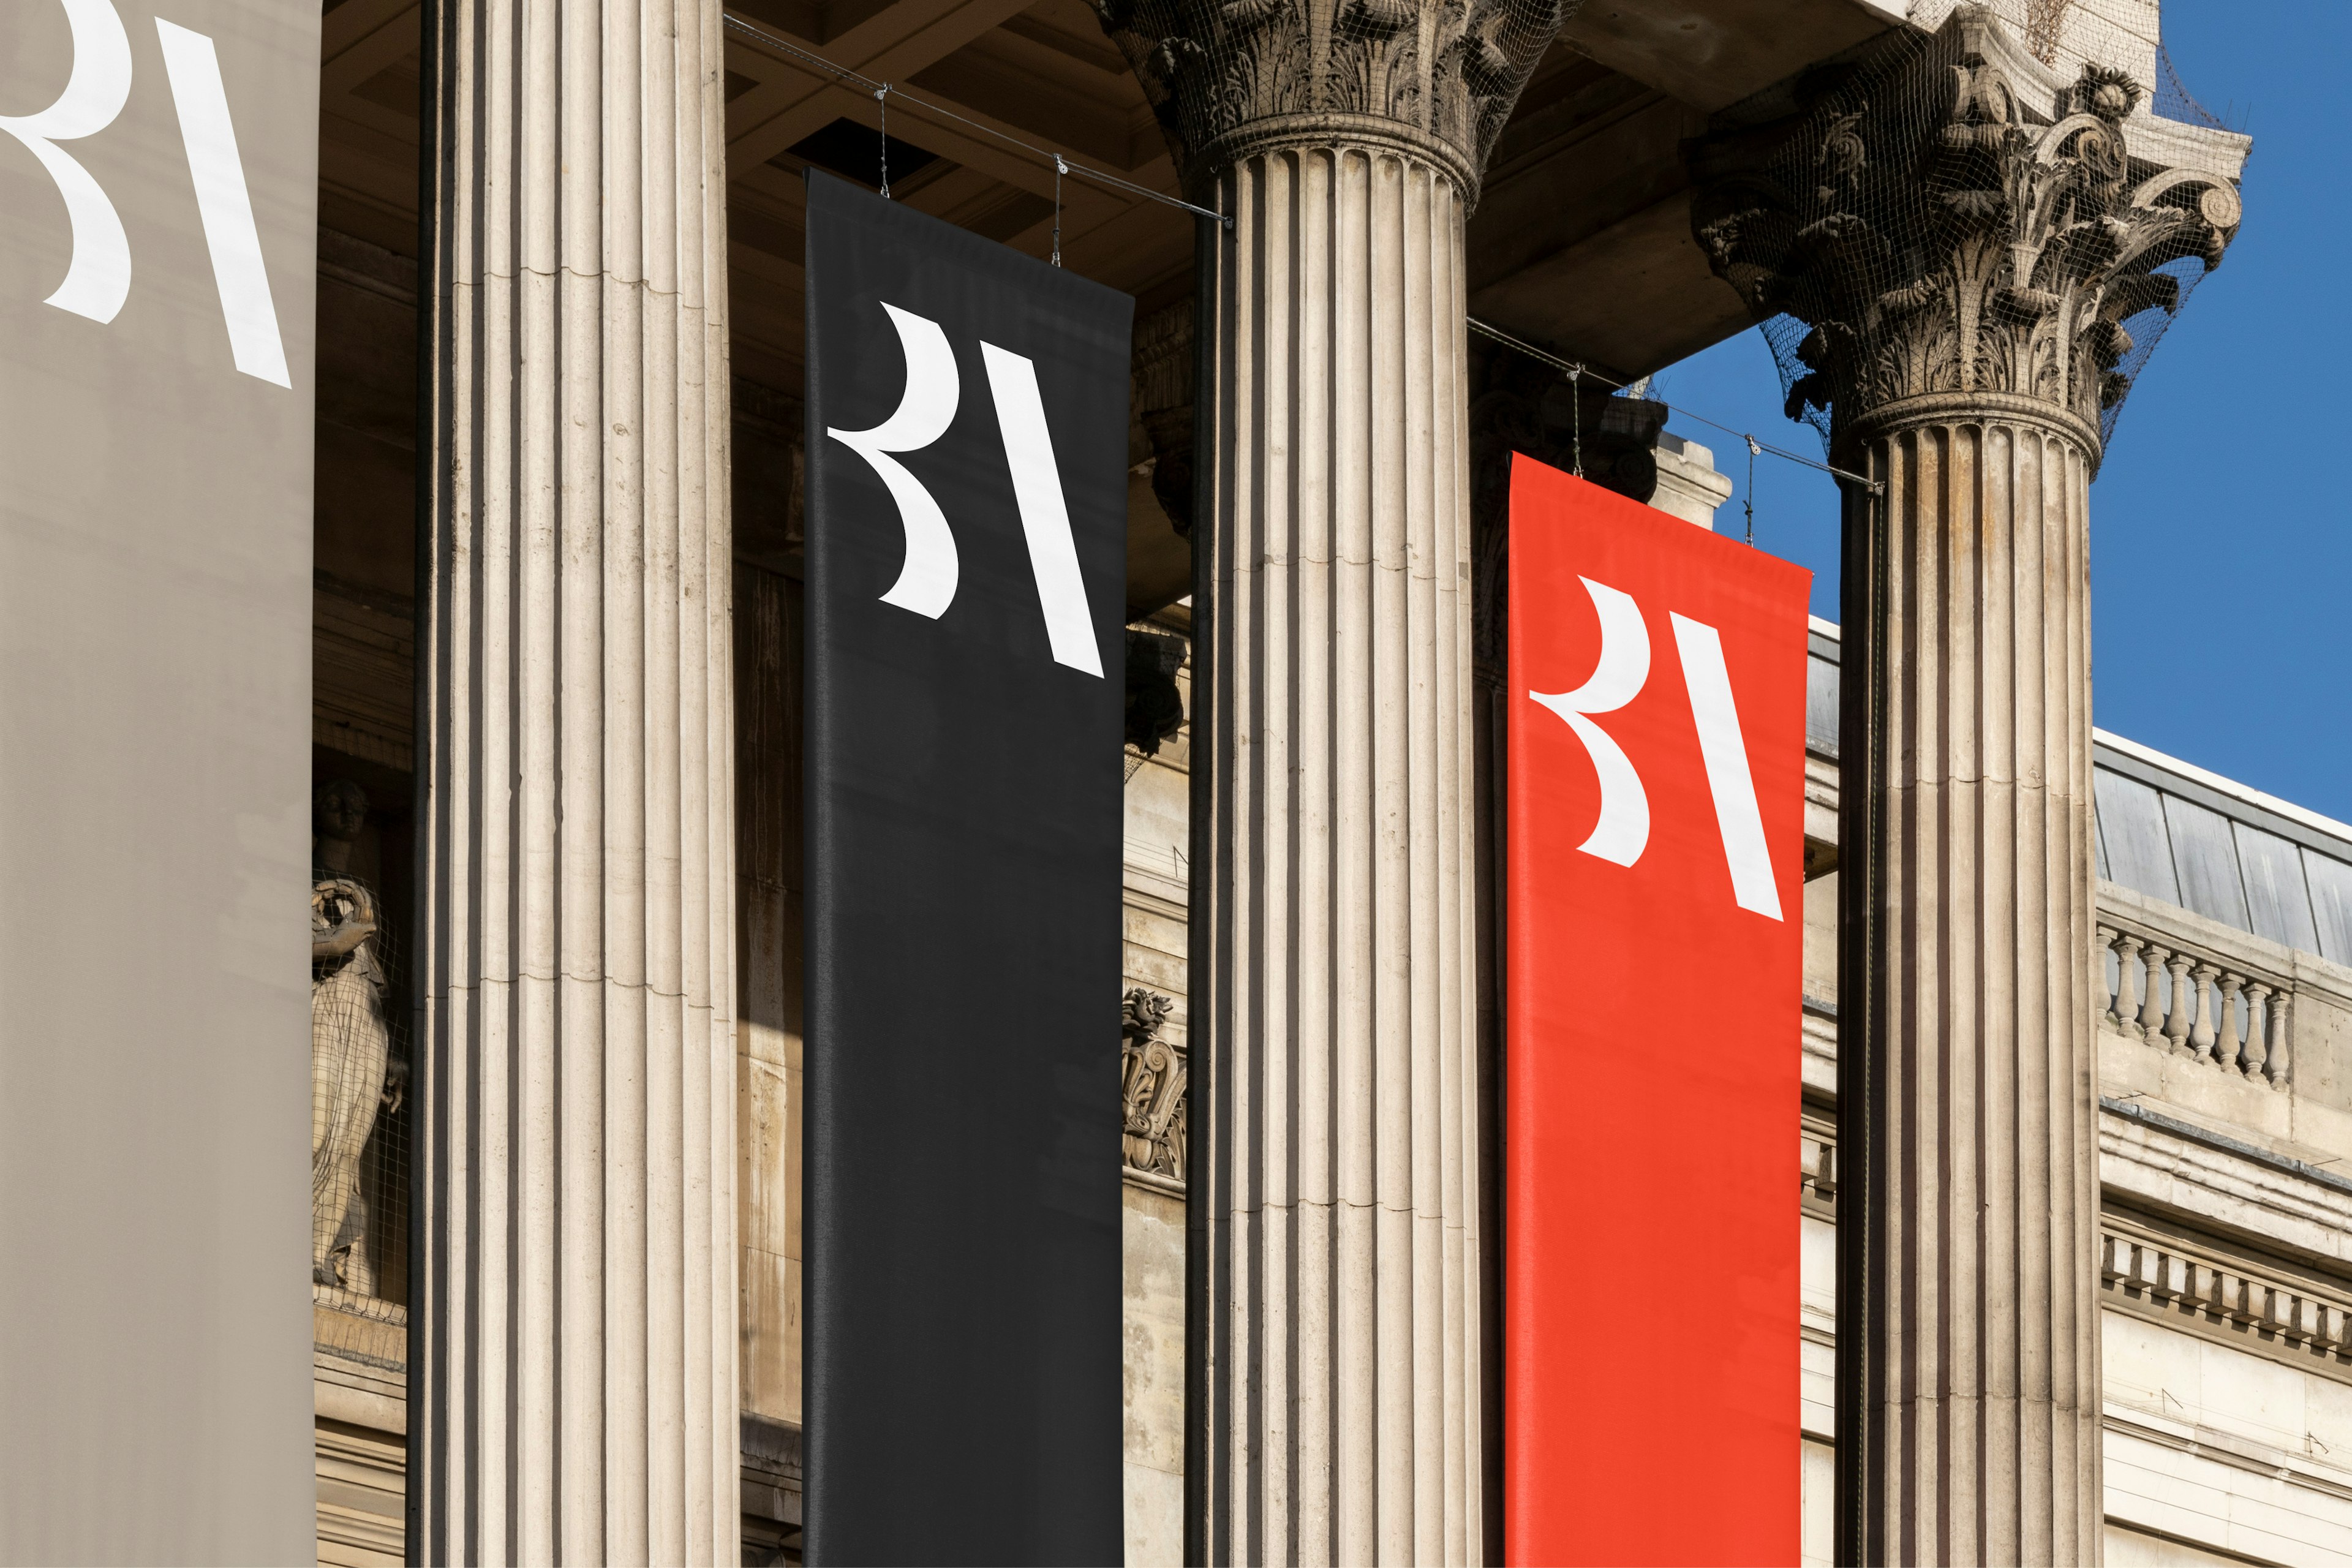 The British Academy hanging banners